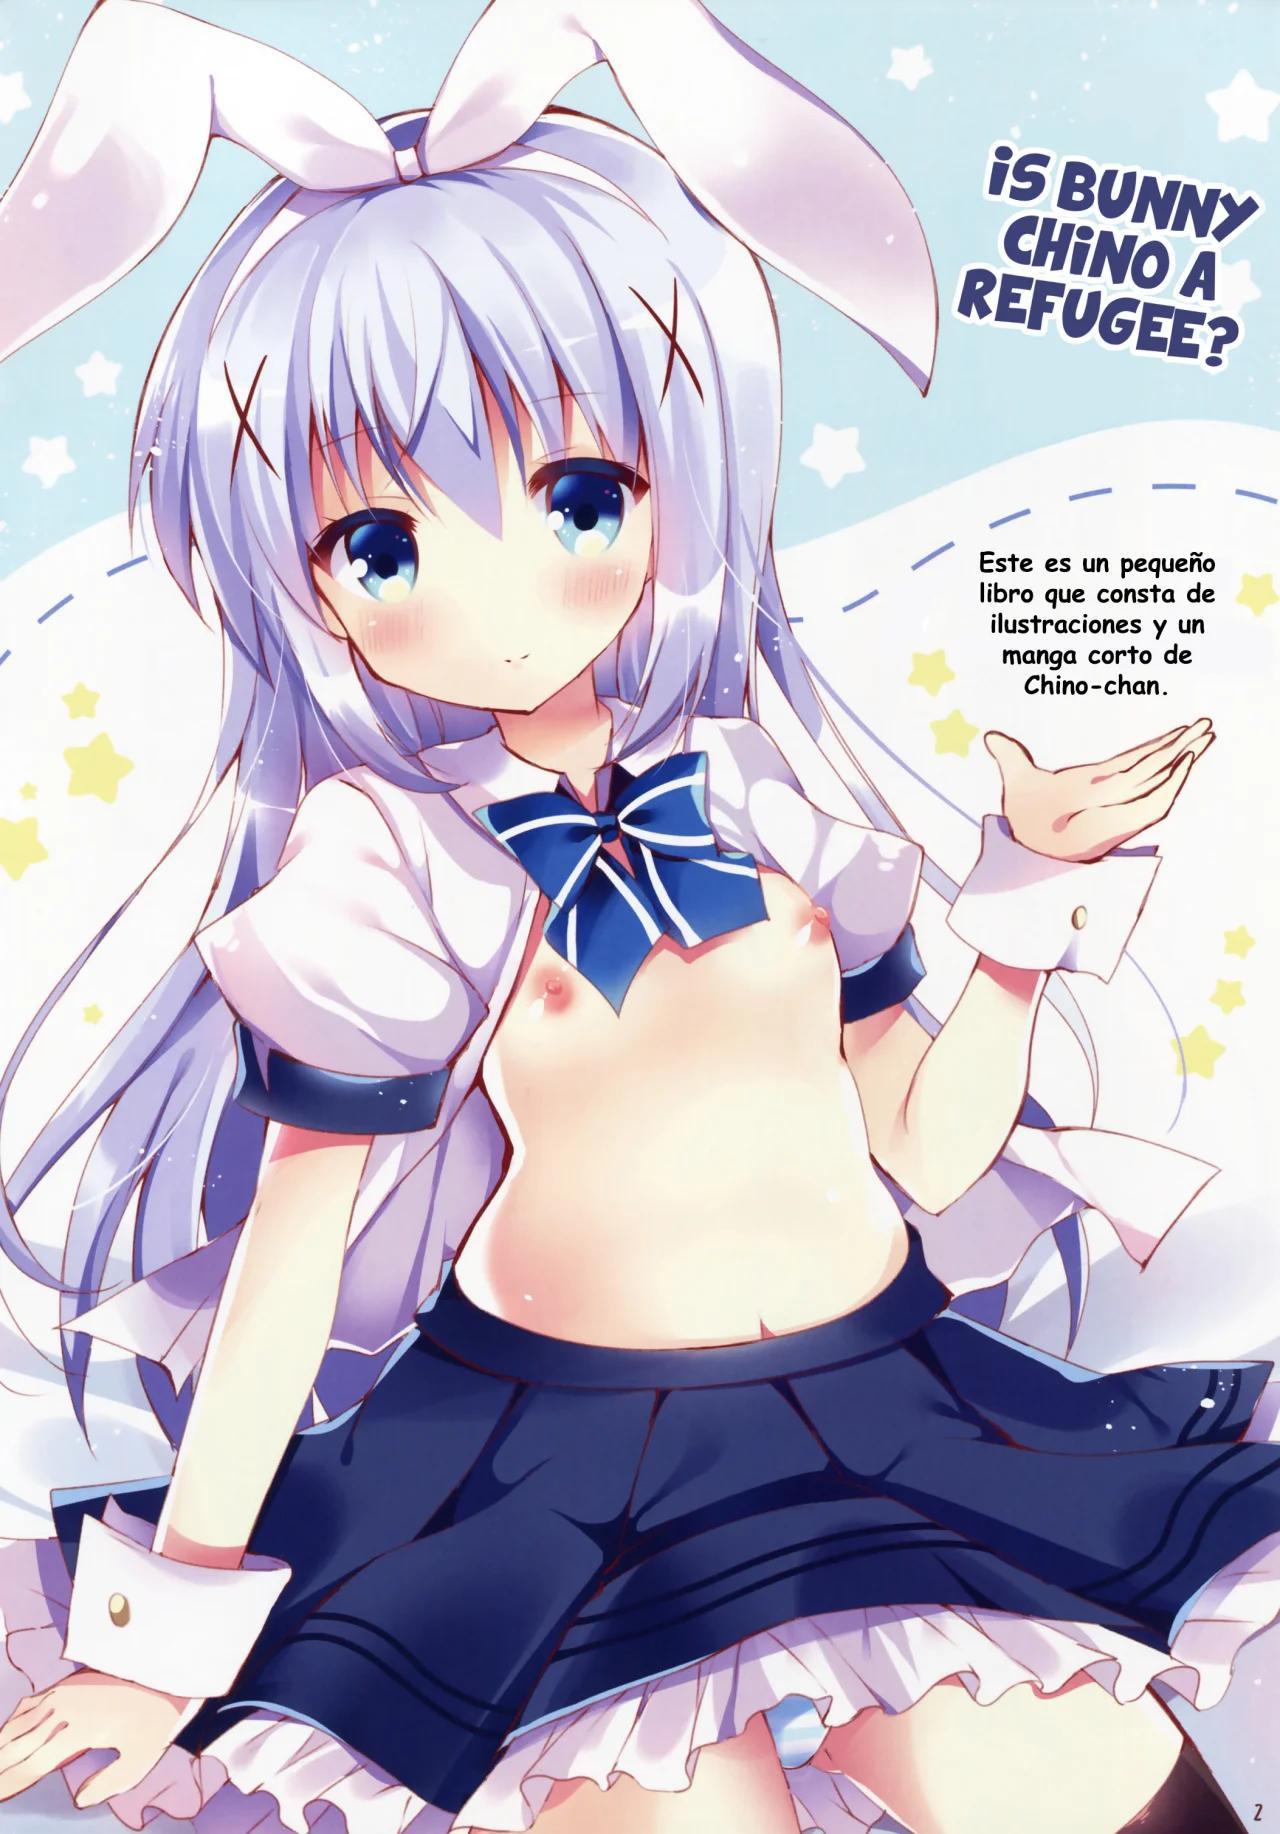 Is Bunny Chino a Refugee? - 1